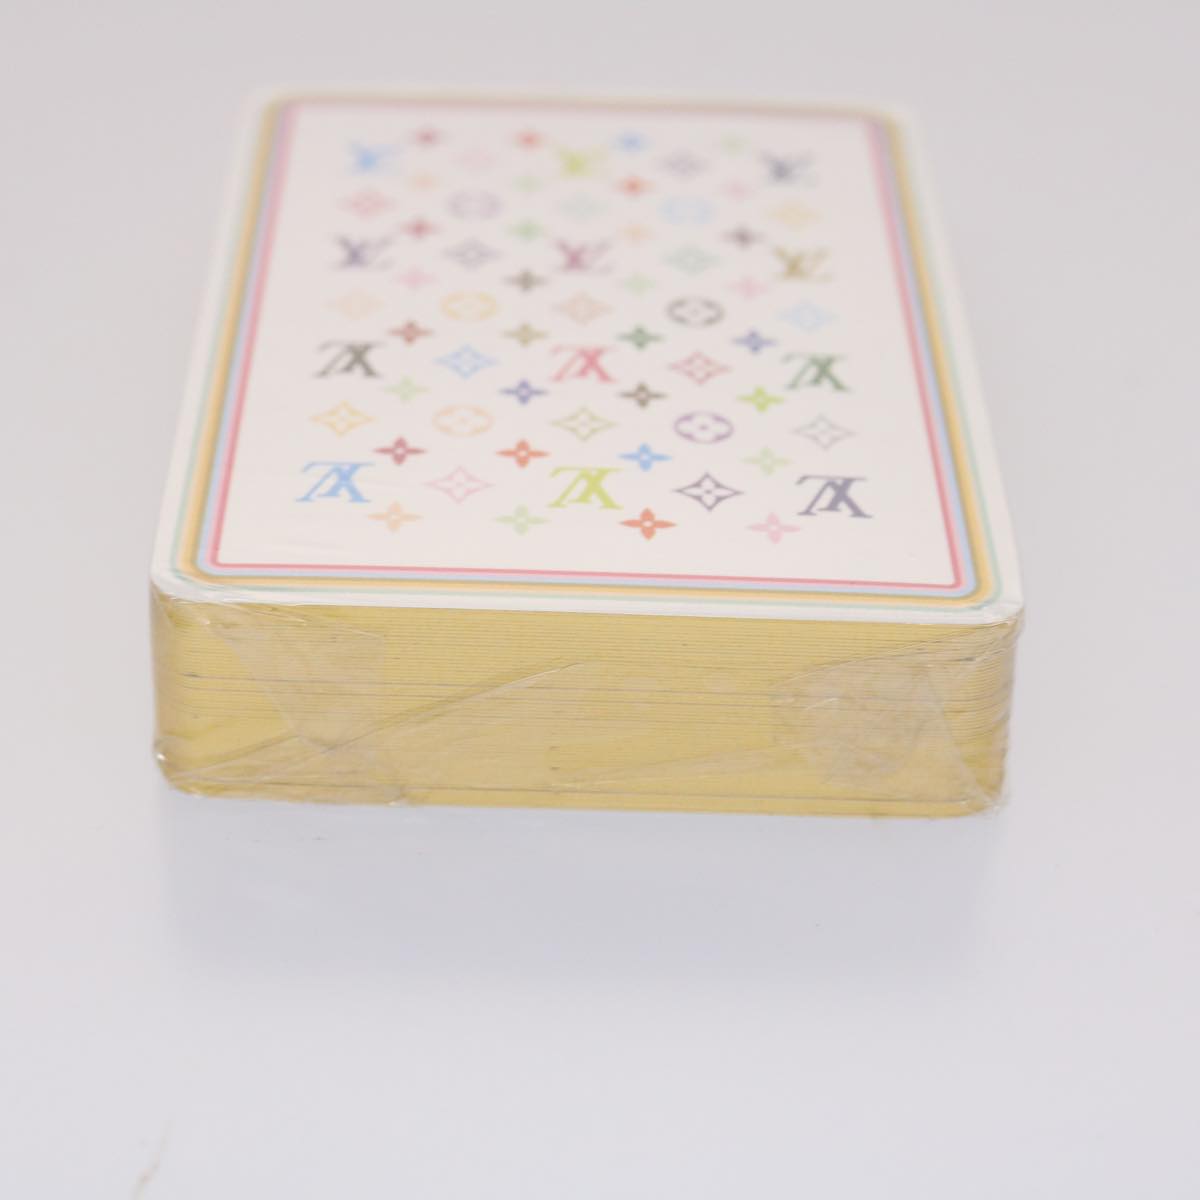 LOUIS VUITTON Playing Cards Multicolor LV Auth 45756A